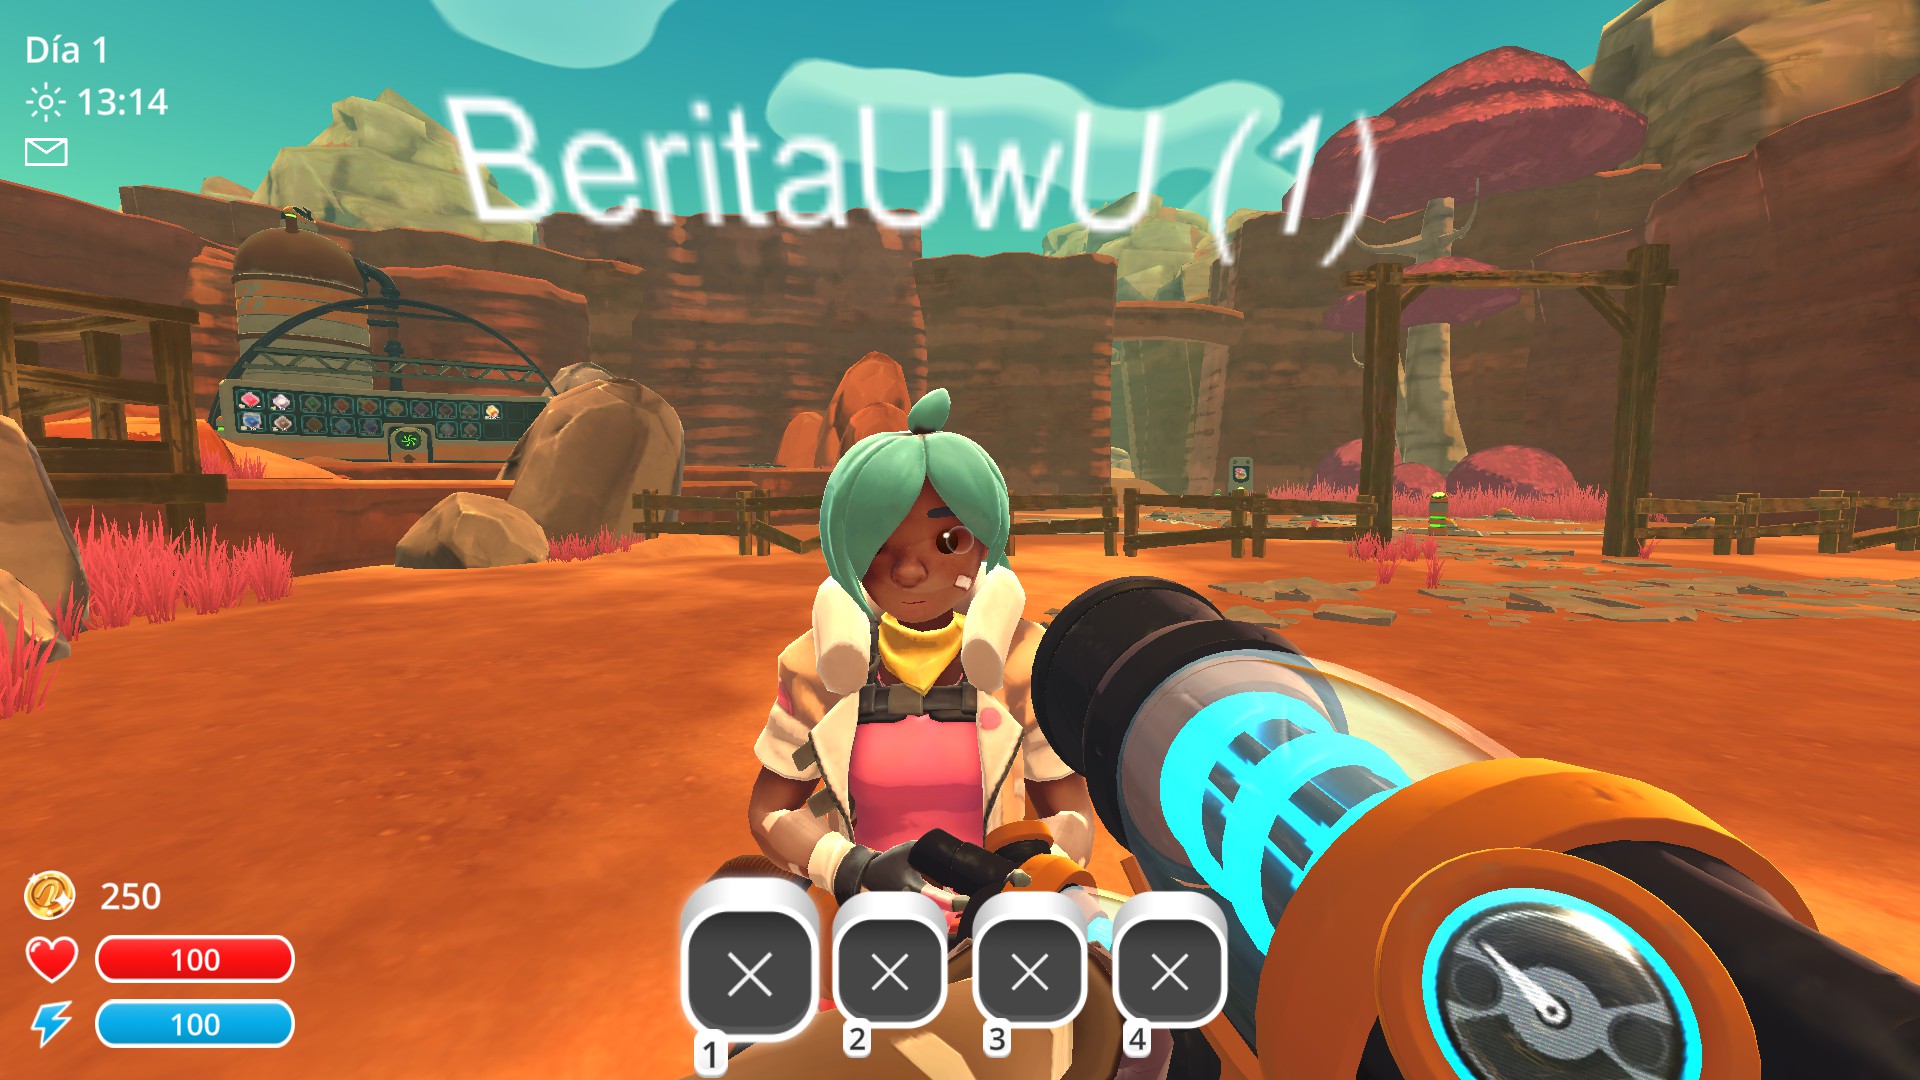 Tips Slime Rancher 2 APK for Android Download